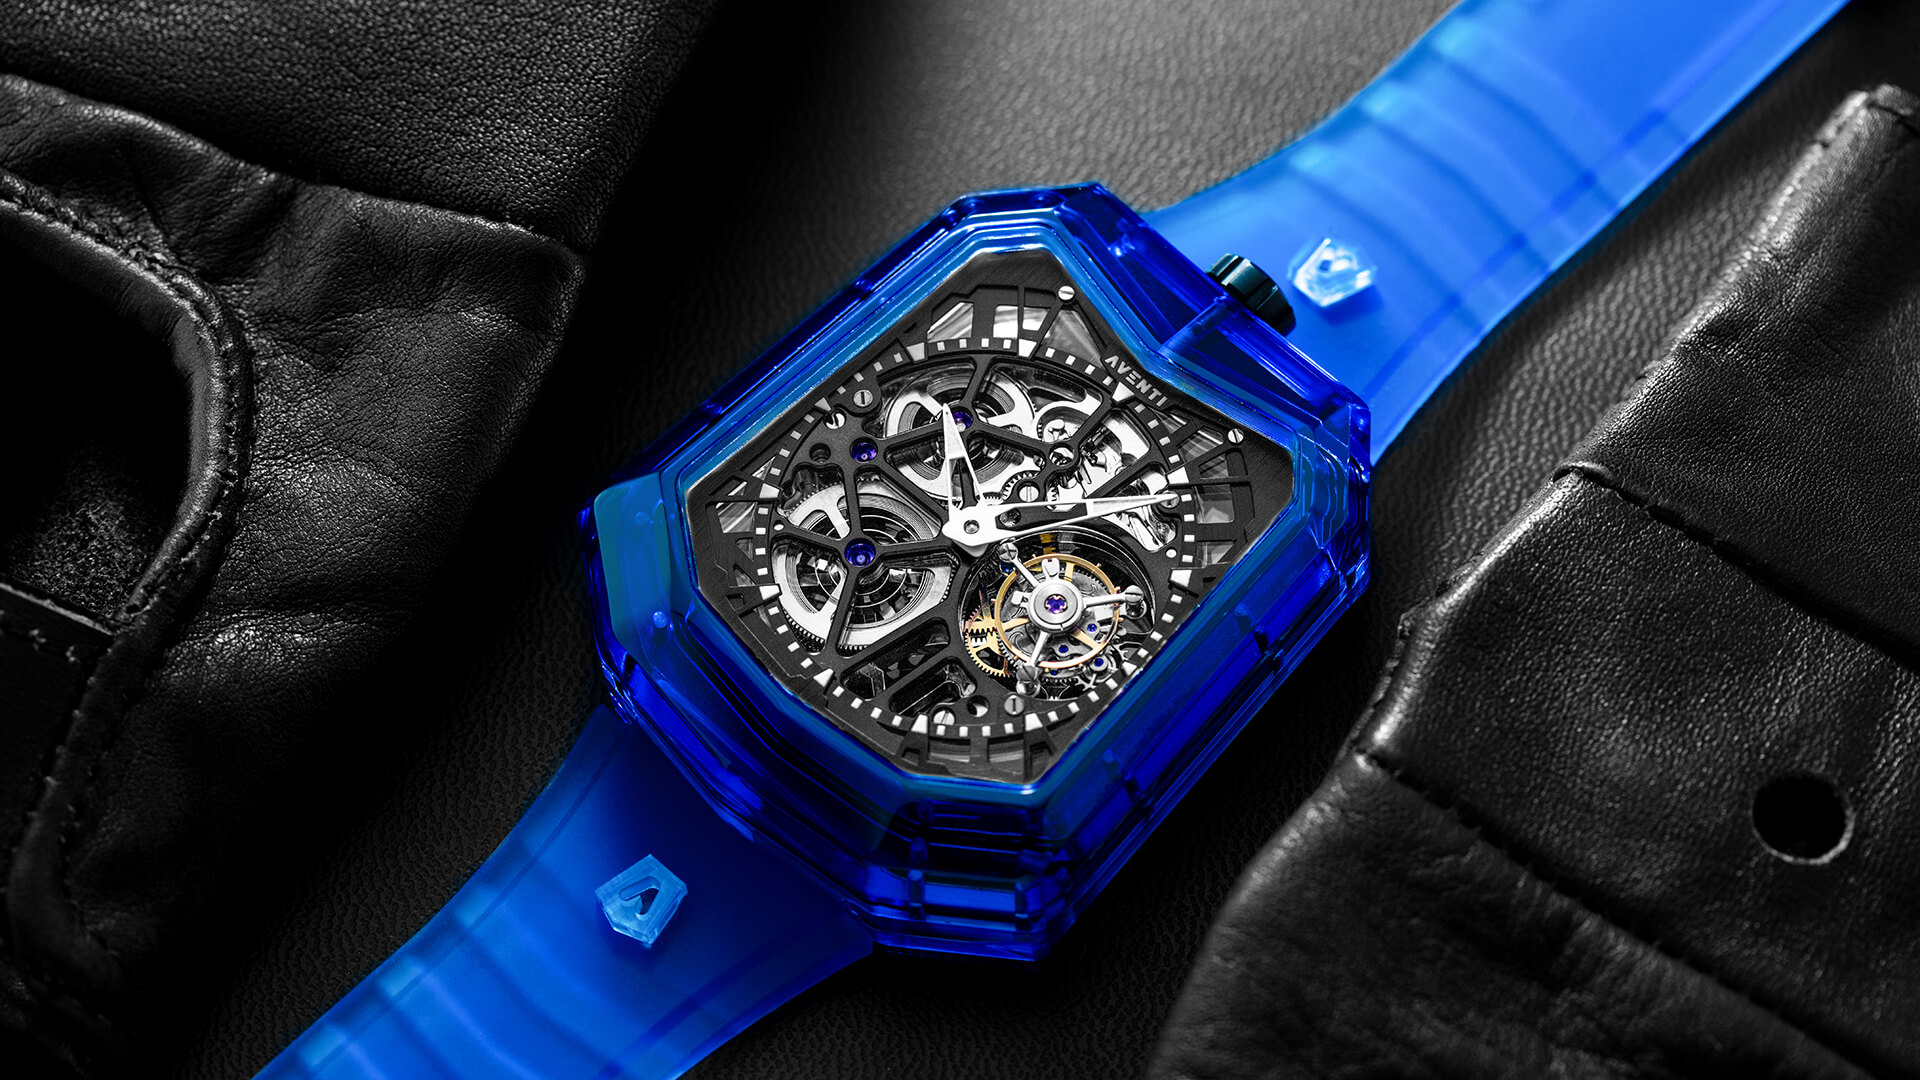 Aventi’s Supercar-Inspired A11-02 Has A Case Made Entirely Of Rare Sapphire